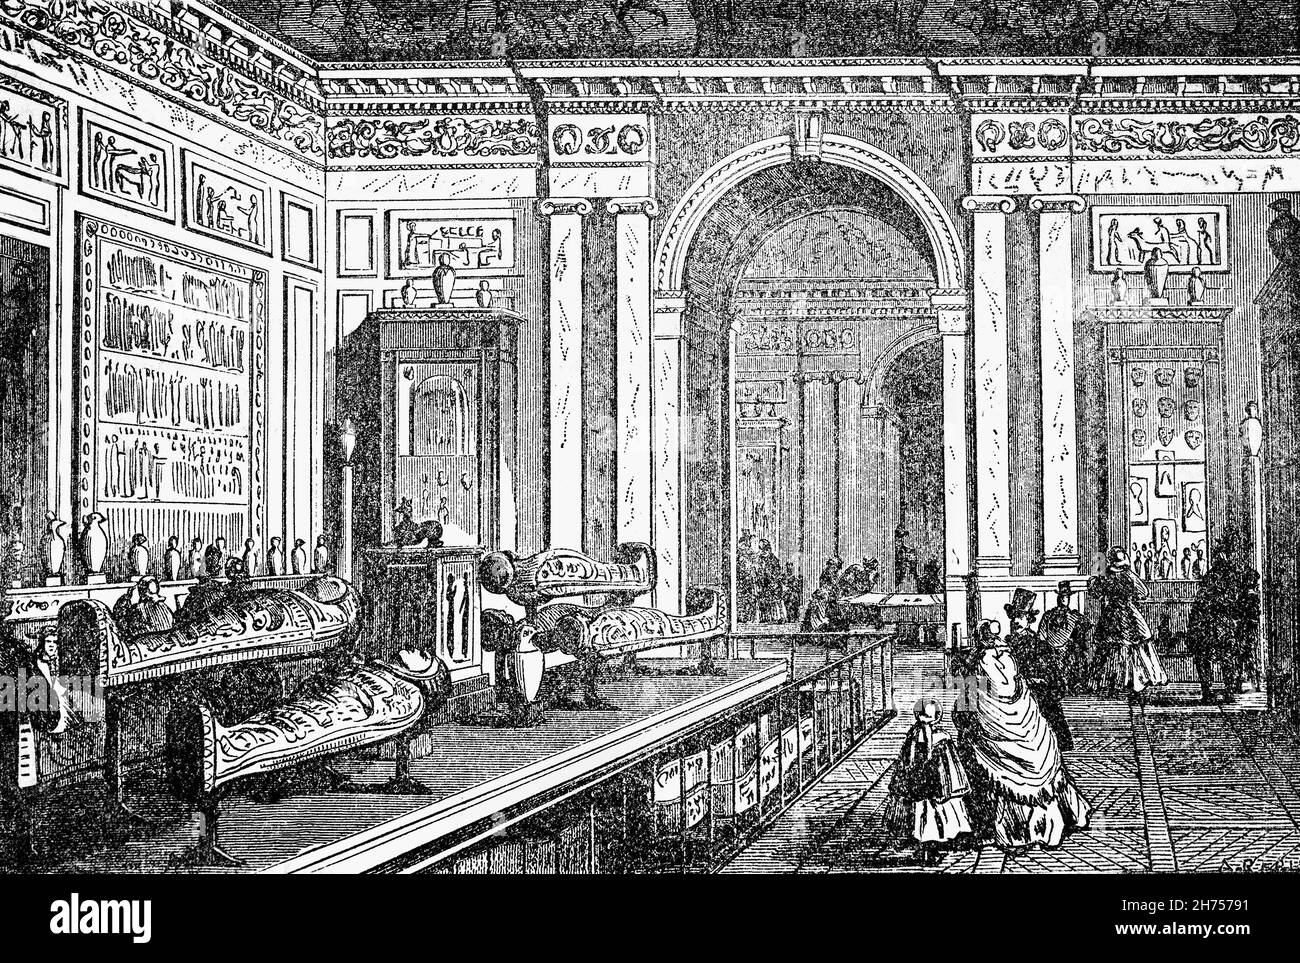 A late 19th Century illustration of the Egyptian Museum in the Louvre Palace, located on the Right Bank of the Seine in Paris, between the Tuileries Gardens and the church of Saint-Germain l'Auxerrois. Originally a military facility, it has served numerous government-related functions and intermittently as a royal residence between the 14th and 18th centuries. Henry IV, France's new king from 1589 is associated with the Grand Dessein ('Grand Design') of uniting the Louvre and the Tuileries in a single building. Stock Photo